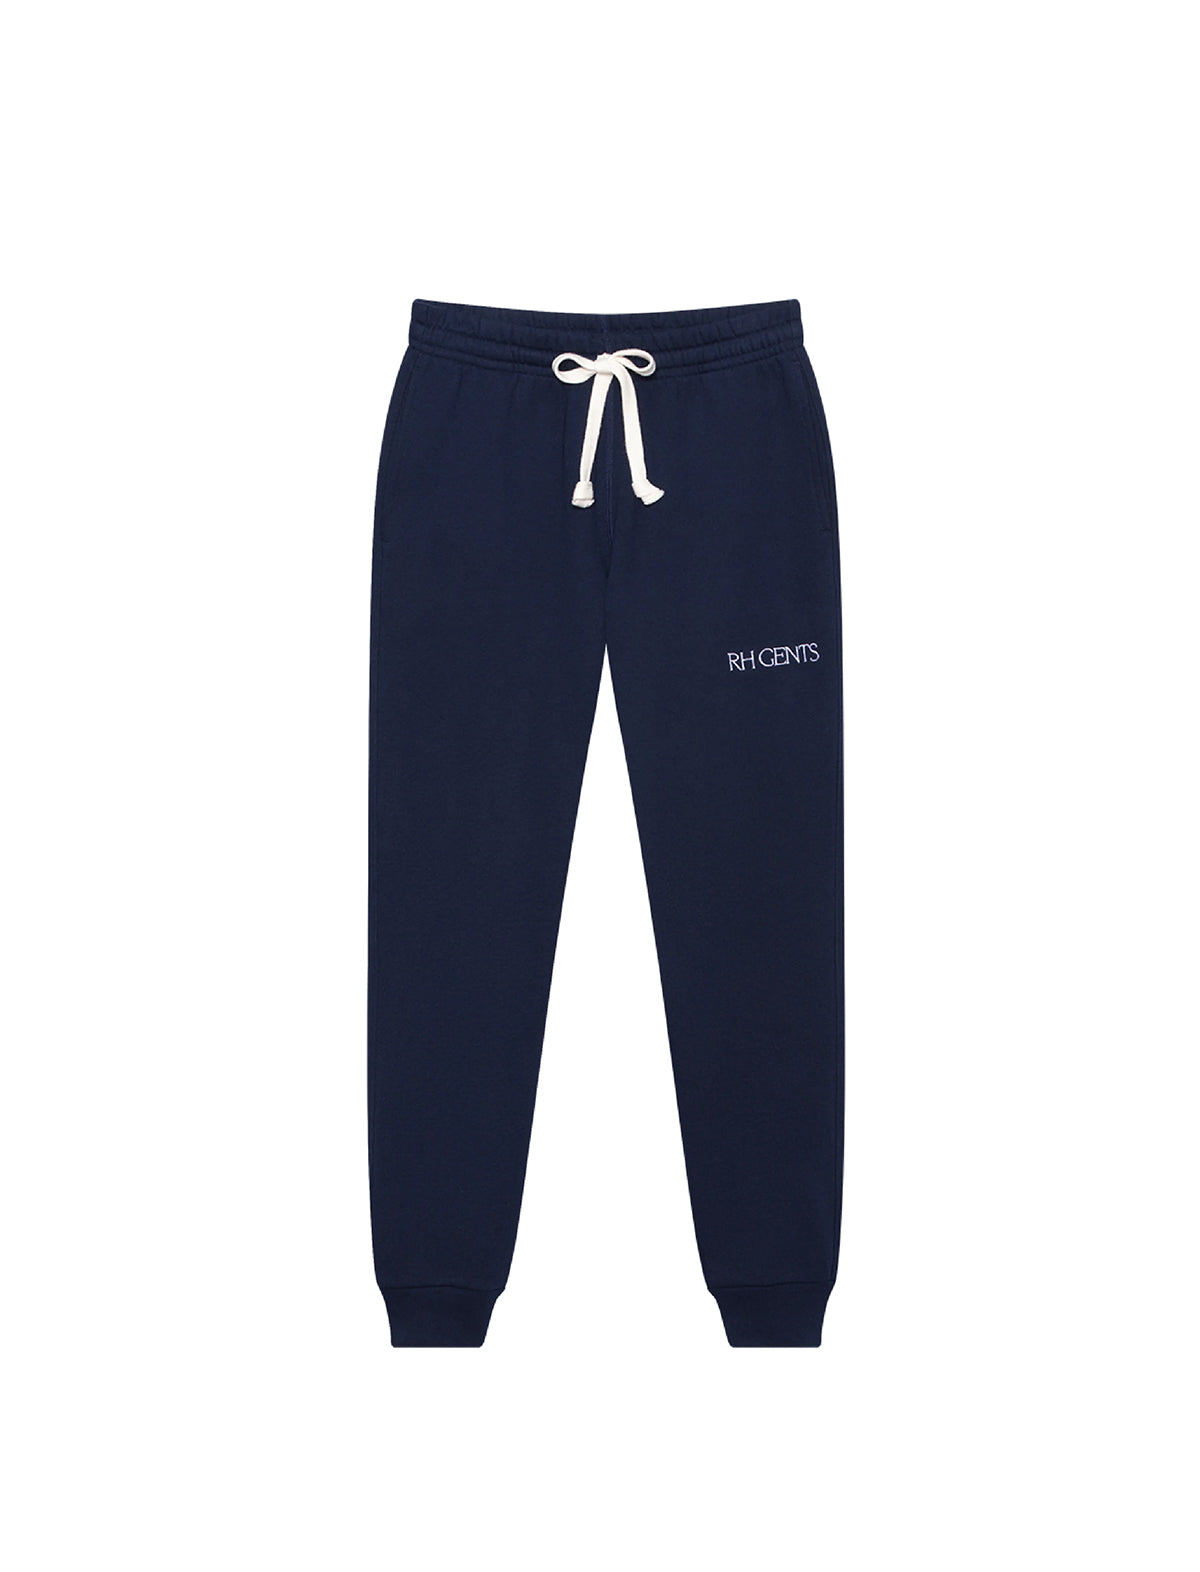 RECREATIONAL HABITS Moose Sweatpants With RH Gents in Navy